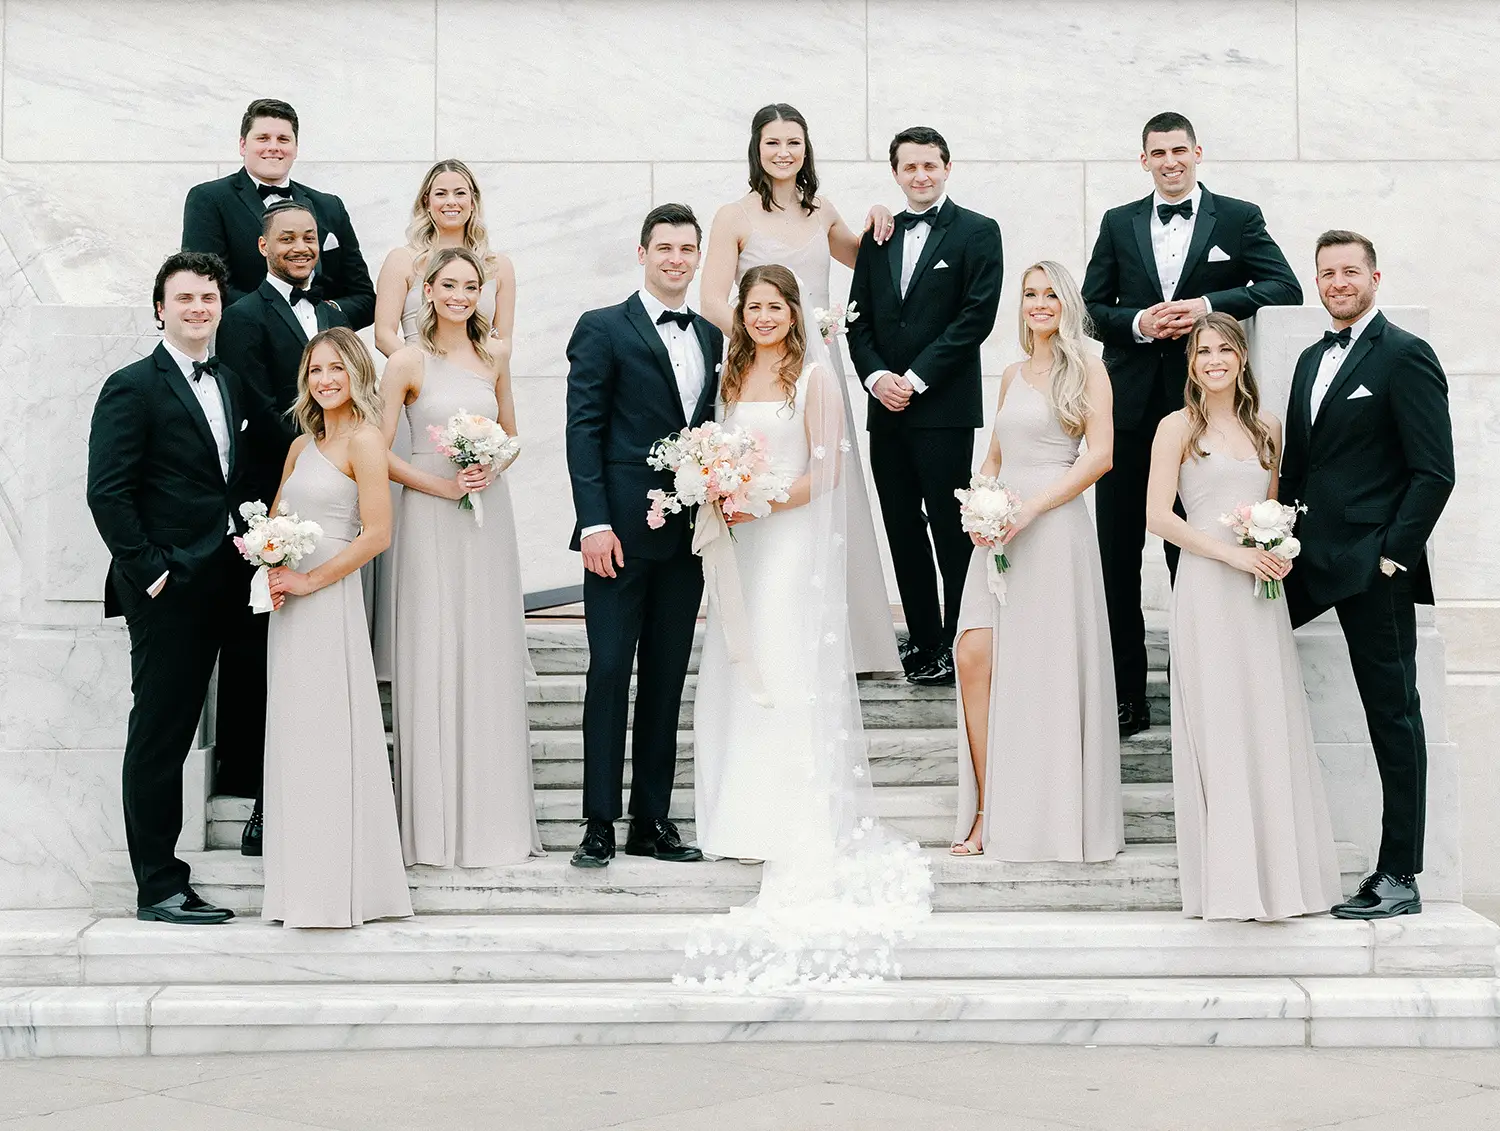 Abbey and Joe posing with their bridesmaids and groomsmen on marble steps